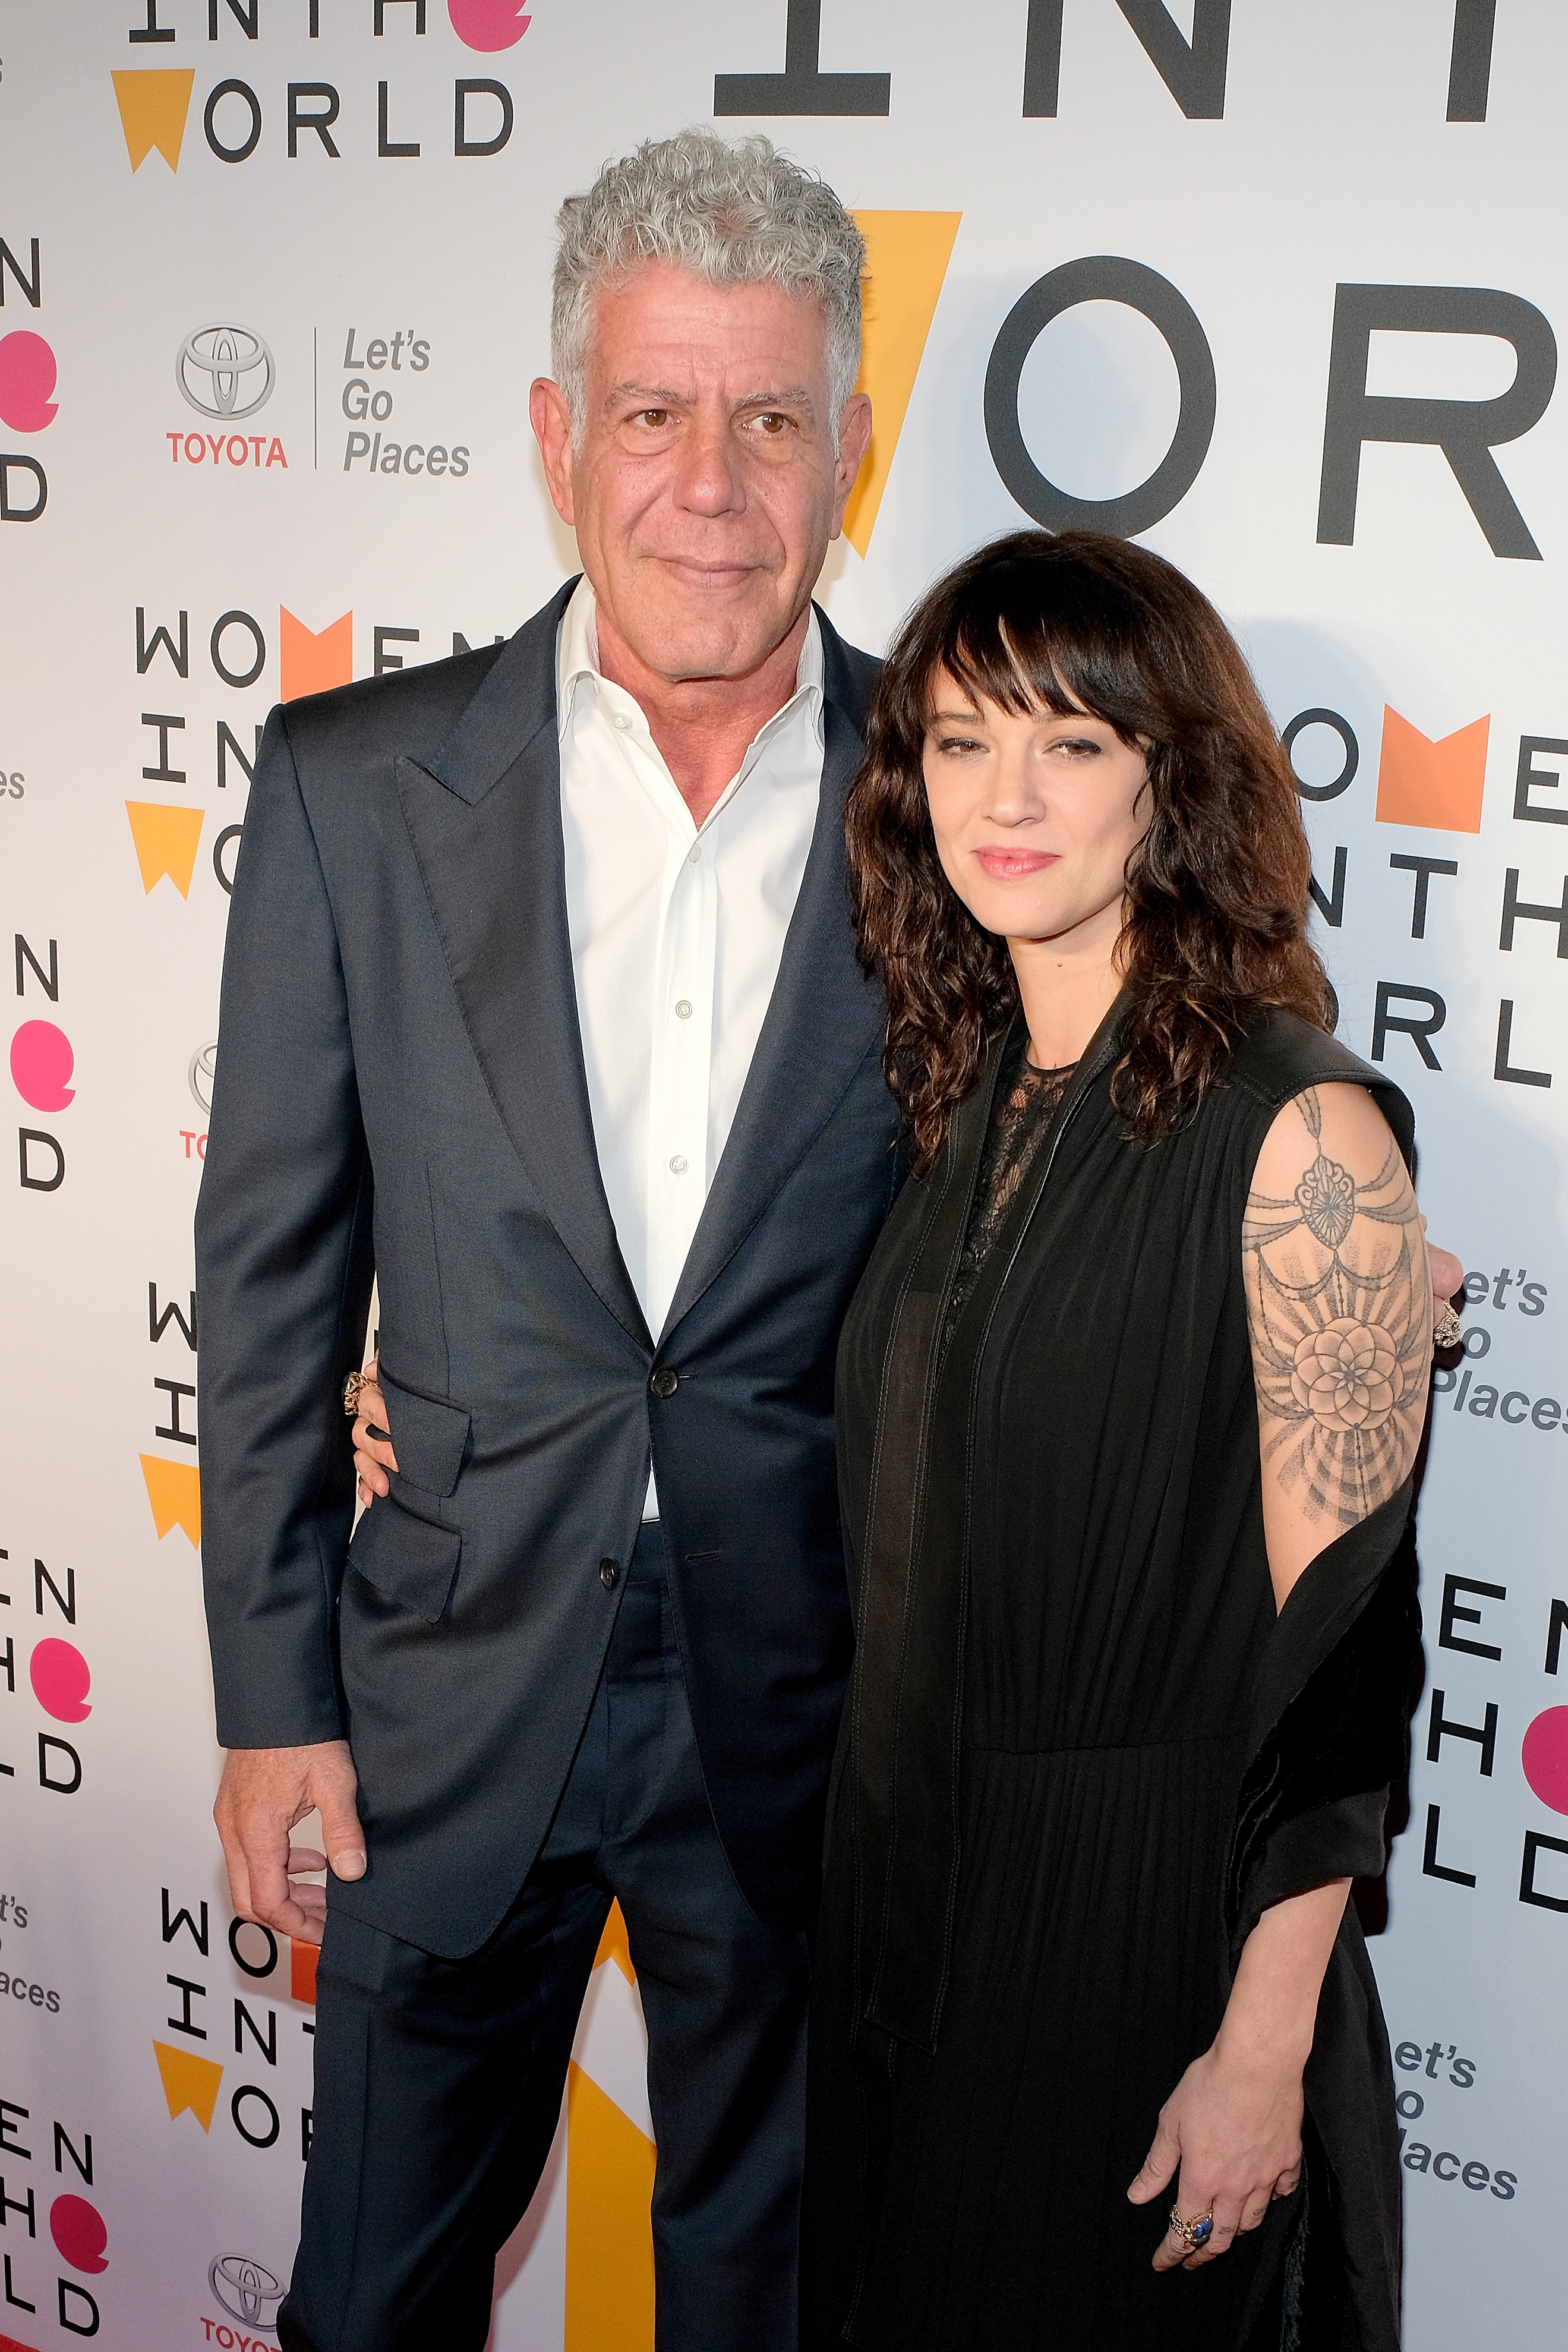 NEW YORK, NY - APRIL 12:  Chef Anthony Bourdain and actor Asia Argento attend the 2018 Women In The World Summit at Lincoln Center on April 12, 2018 in New York City.  (Photo by Matthew Eisman/Getty Images)